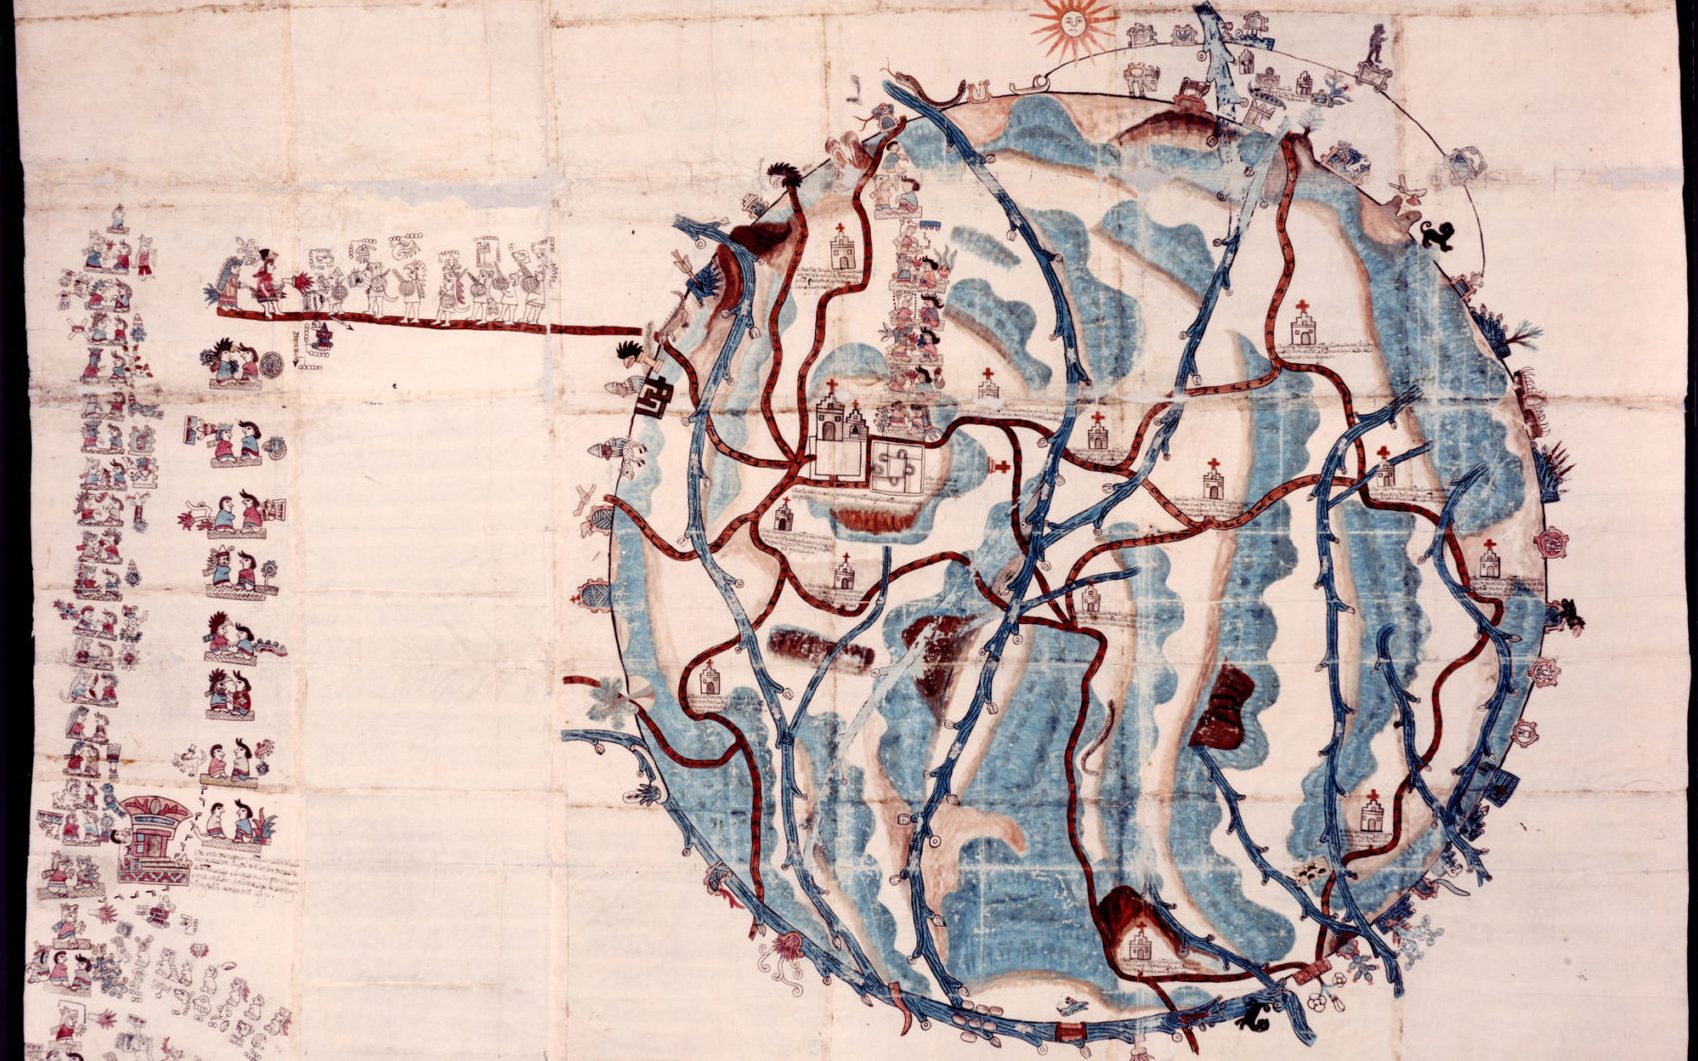 Watercolor map created in 1580. The map is organized into a circle with marked waterways, roads, and buildings. On the far left side a column of figures represent ten generations of local rulers including a series of footprints to indicate a marriage alliance with a neighboring town.